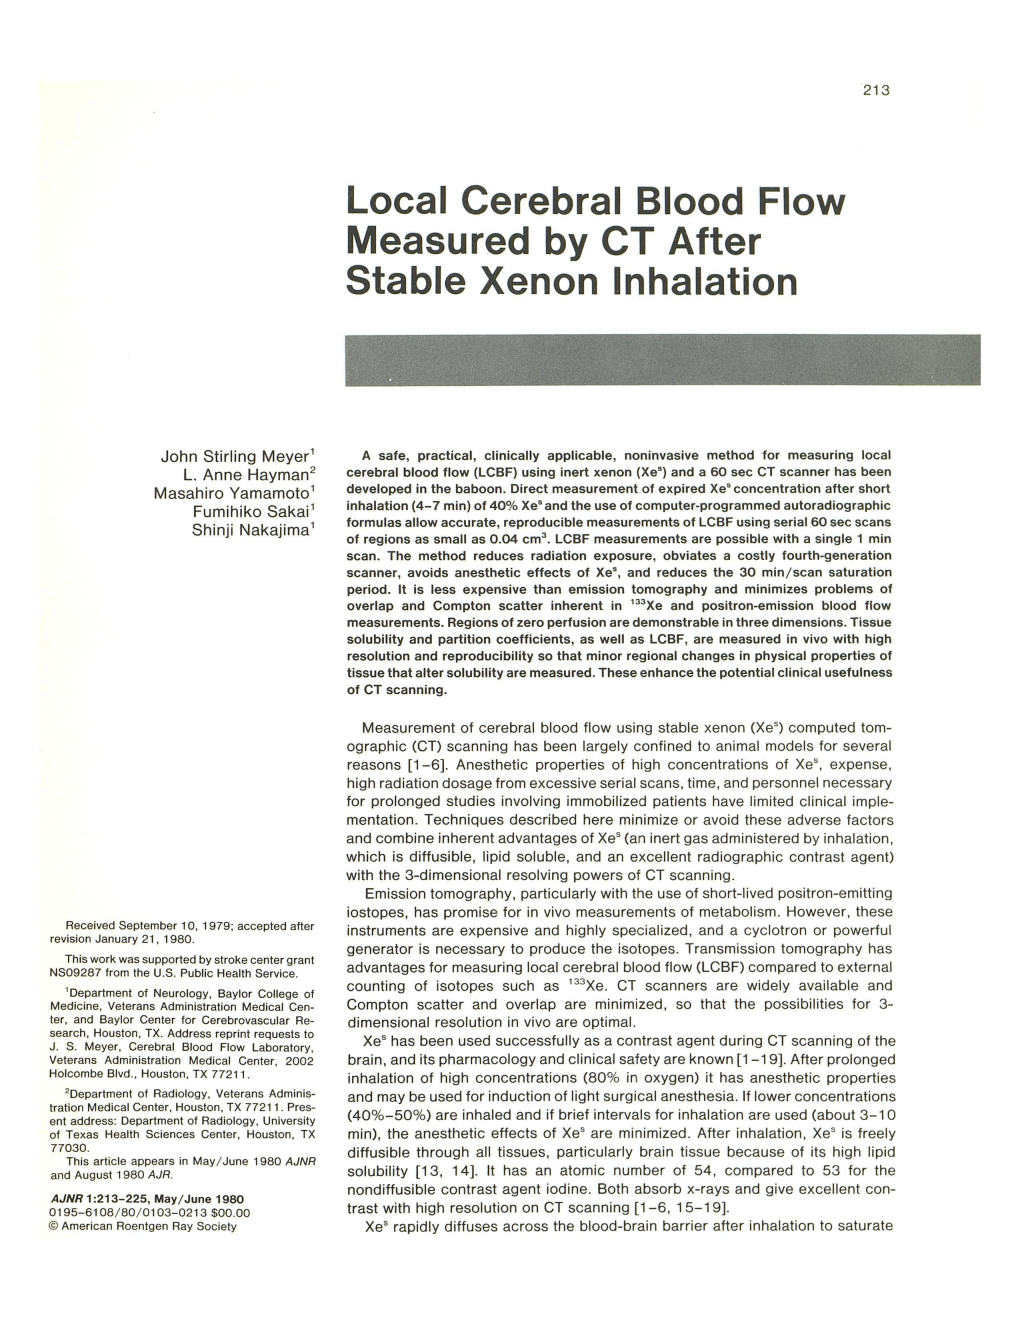 Local Cerebral Blood Flow Measured by CT After Stable Xenon Inhalation